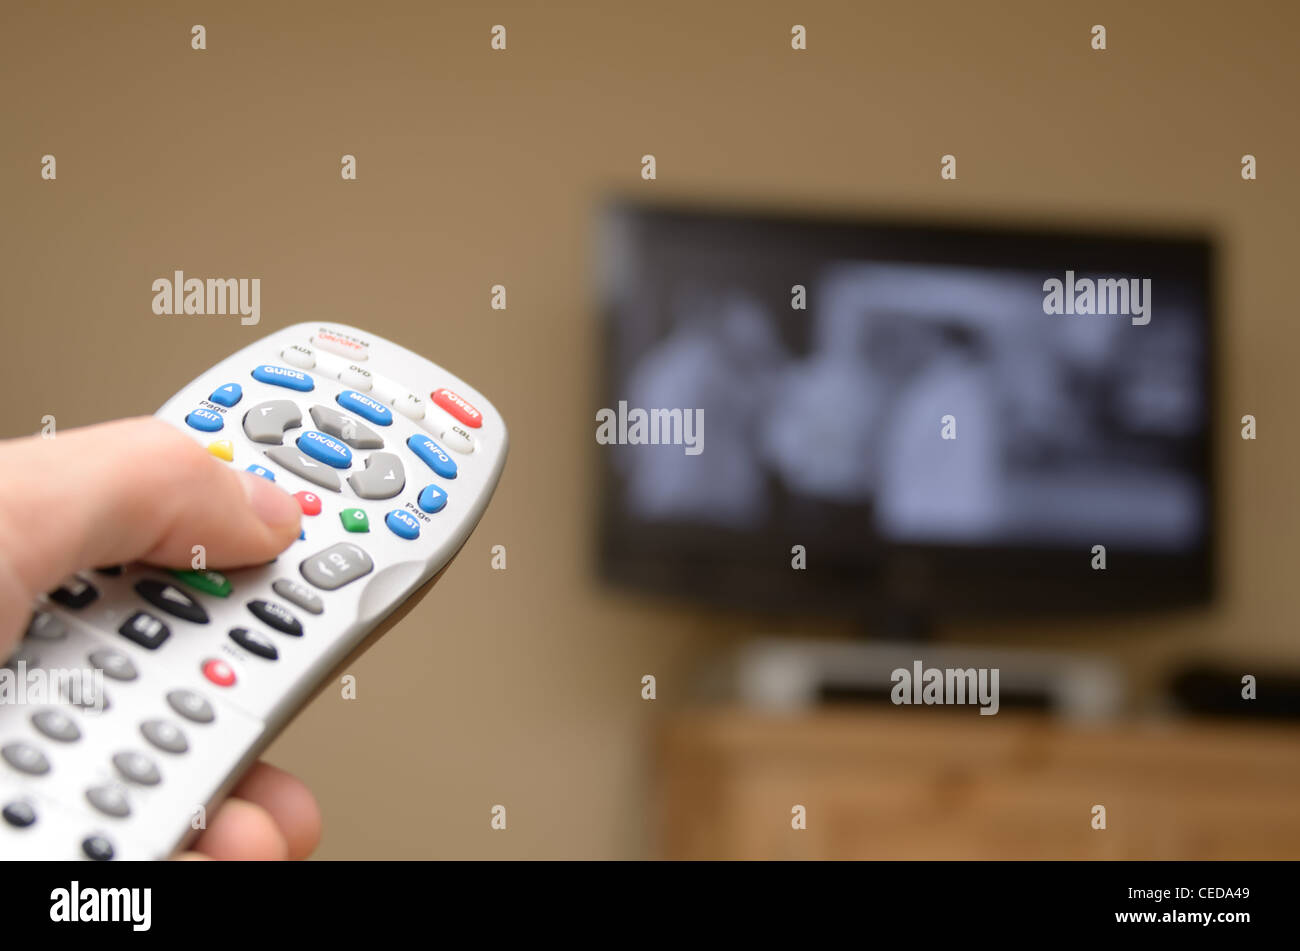 TTelevision remote in the foreground with selective focus and television in the background. Stock Photo